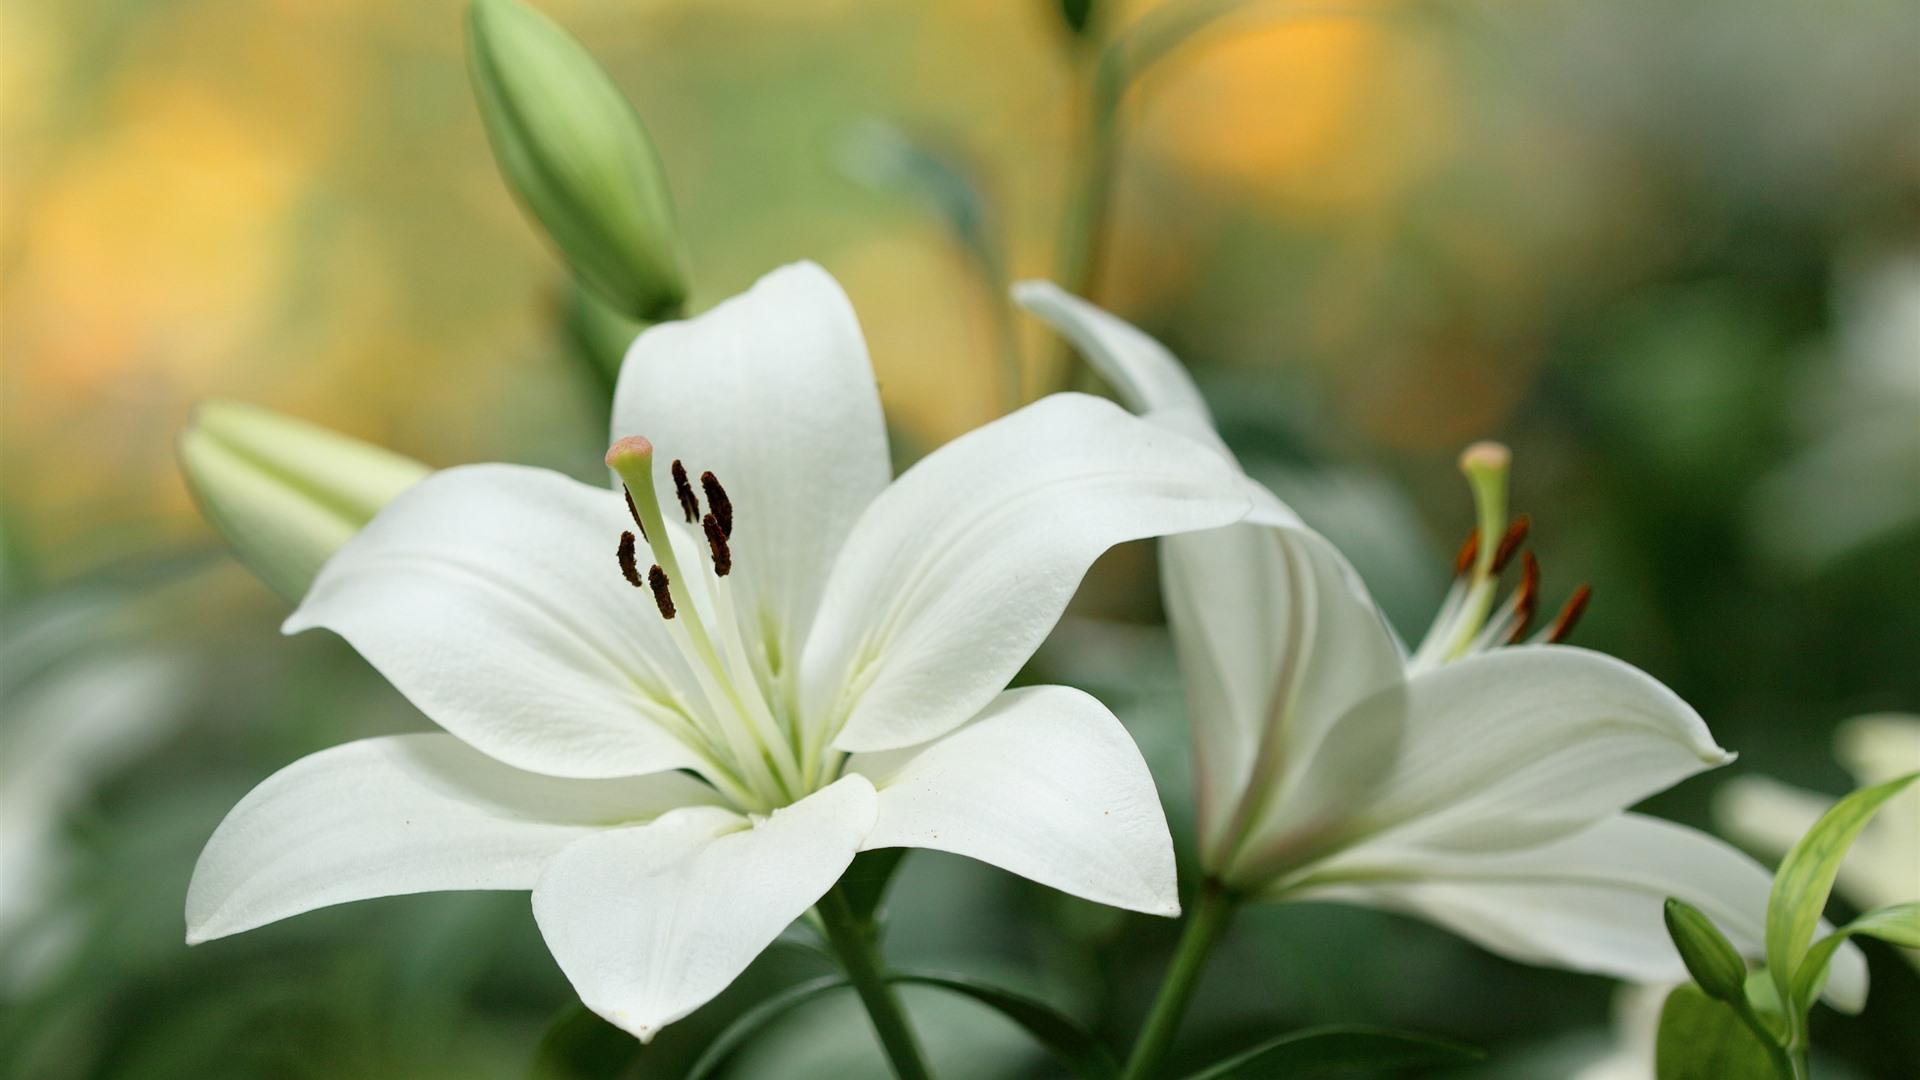 White-lily-flowers-close-up_1920x1080